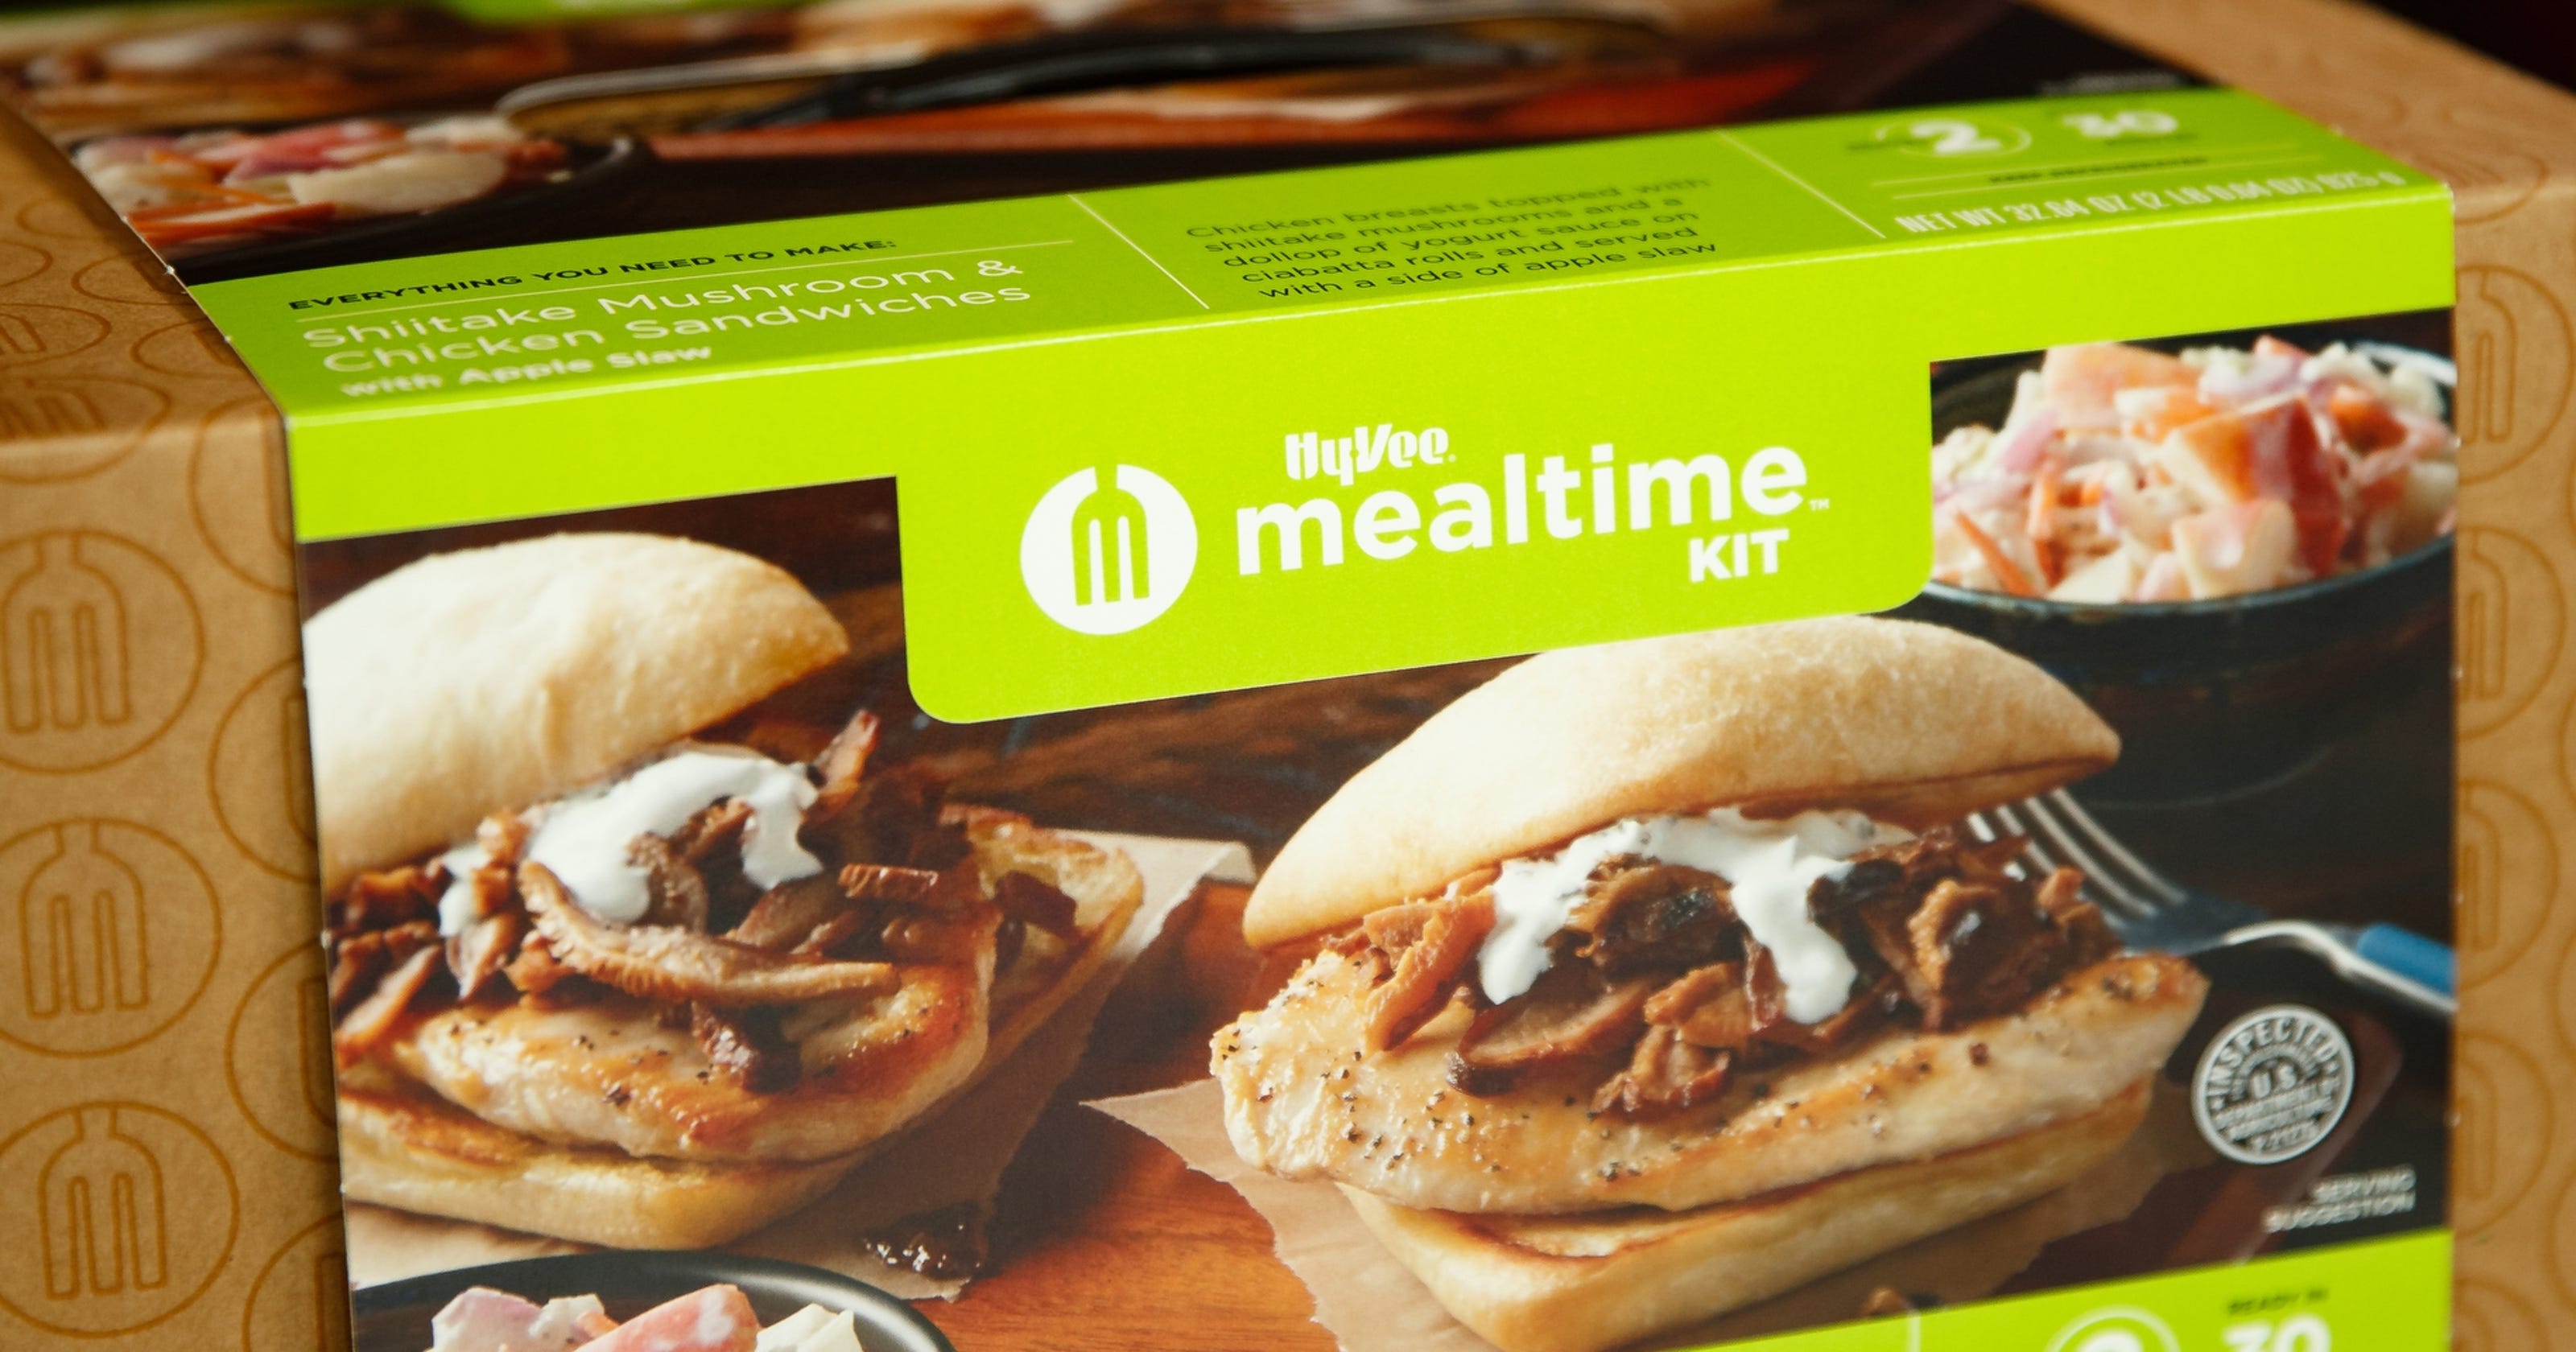 We tried Hy-Vee's new Mealtime Kits. Here's how they work (and taste).